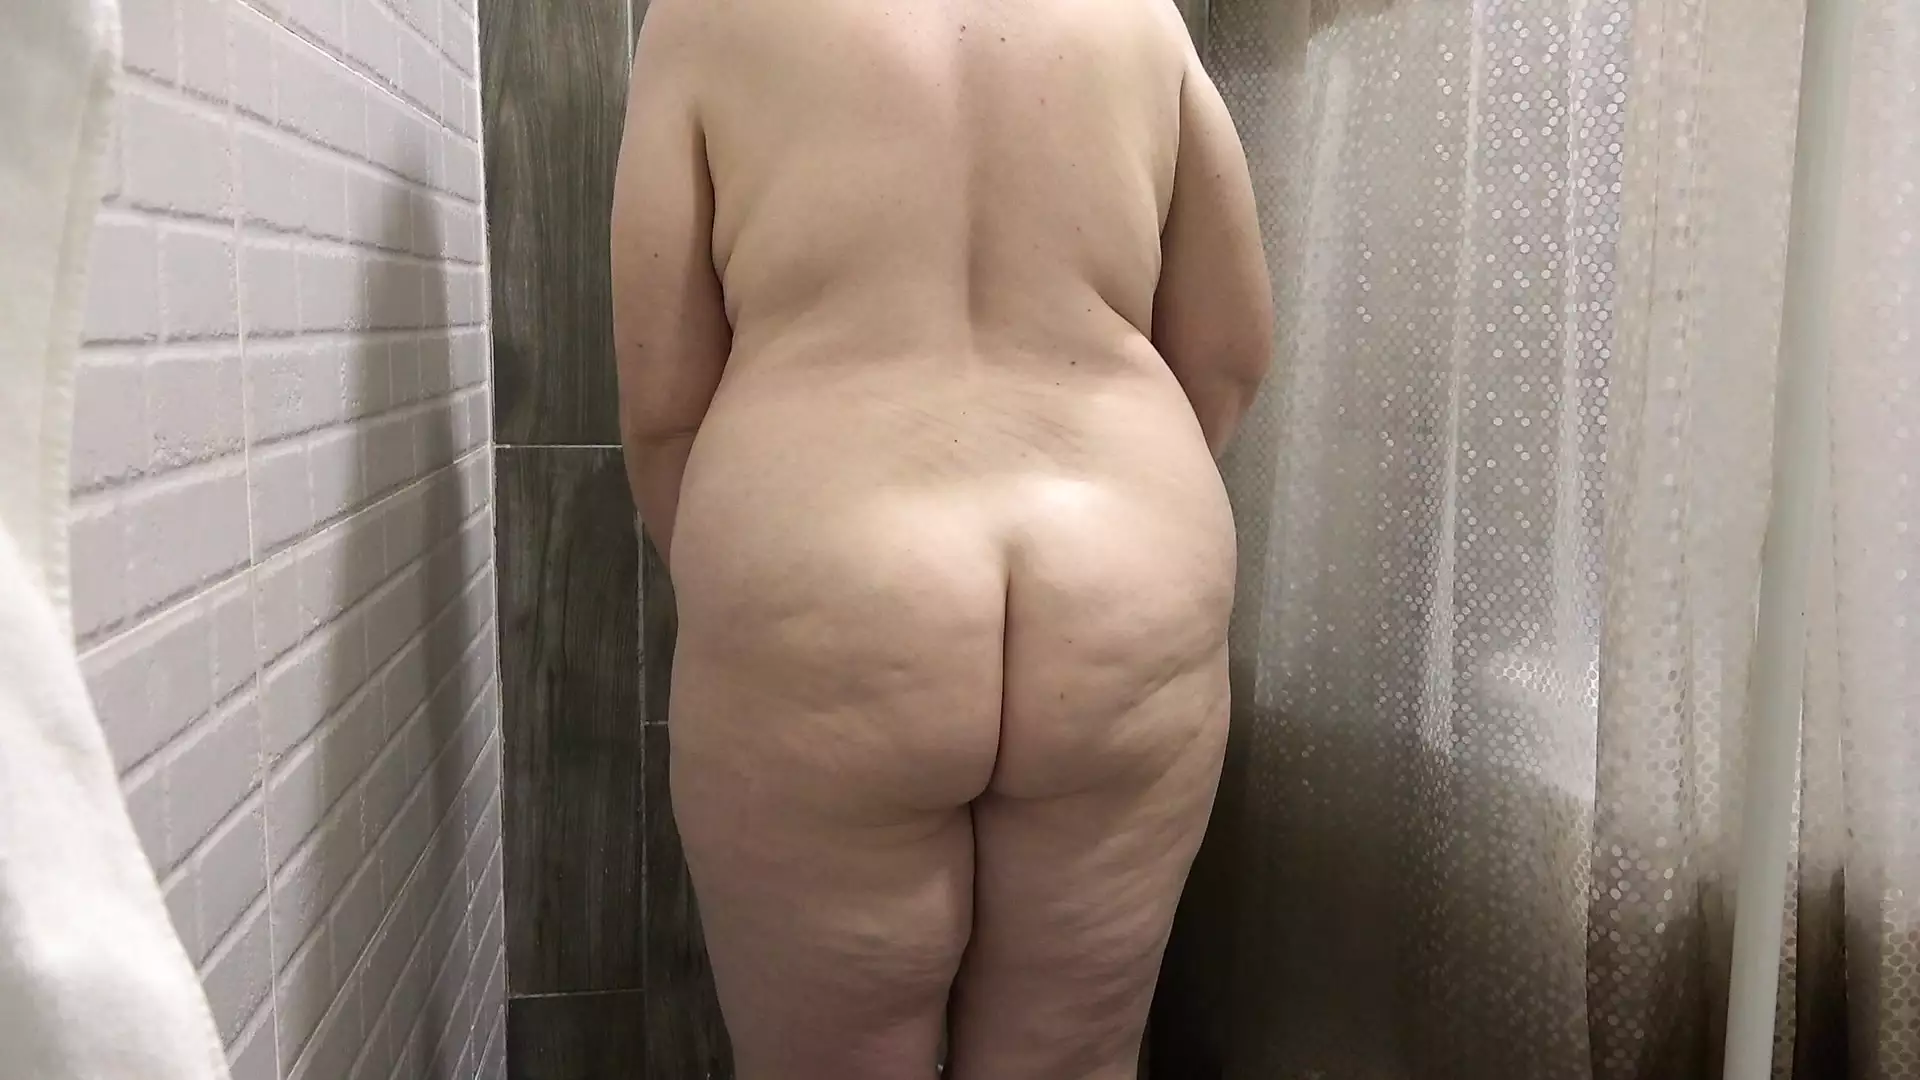 The camera in the shower is watching a curvy MILF. Mature bbw washes fat ass, big boobs, hairy pussy. PAWG. Amateur fetish